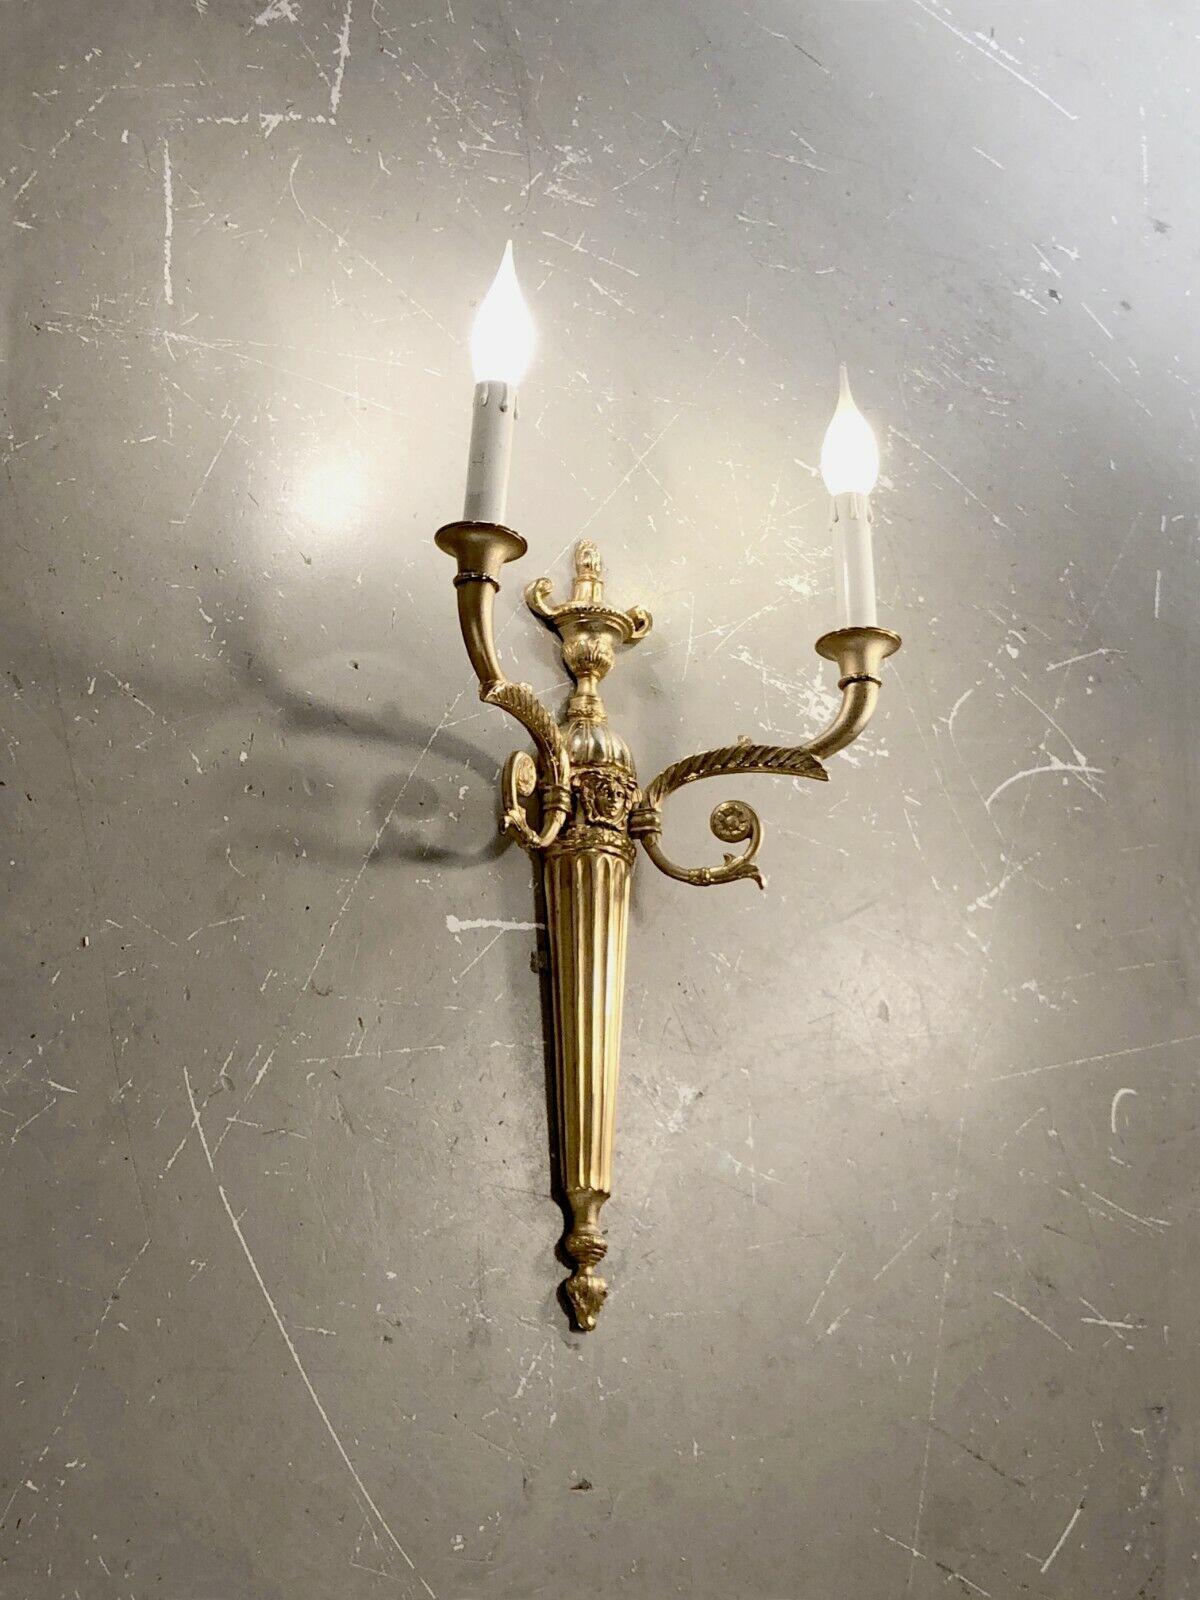 A large wall light with 2 arms of light, Neo-Classical, Baroque, Empire, in gilded bronze with very refined chiseled decorations, by Gianni Versace, Italy 1990.

This wall light features the Versace logo at the top.